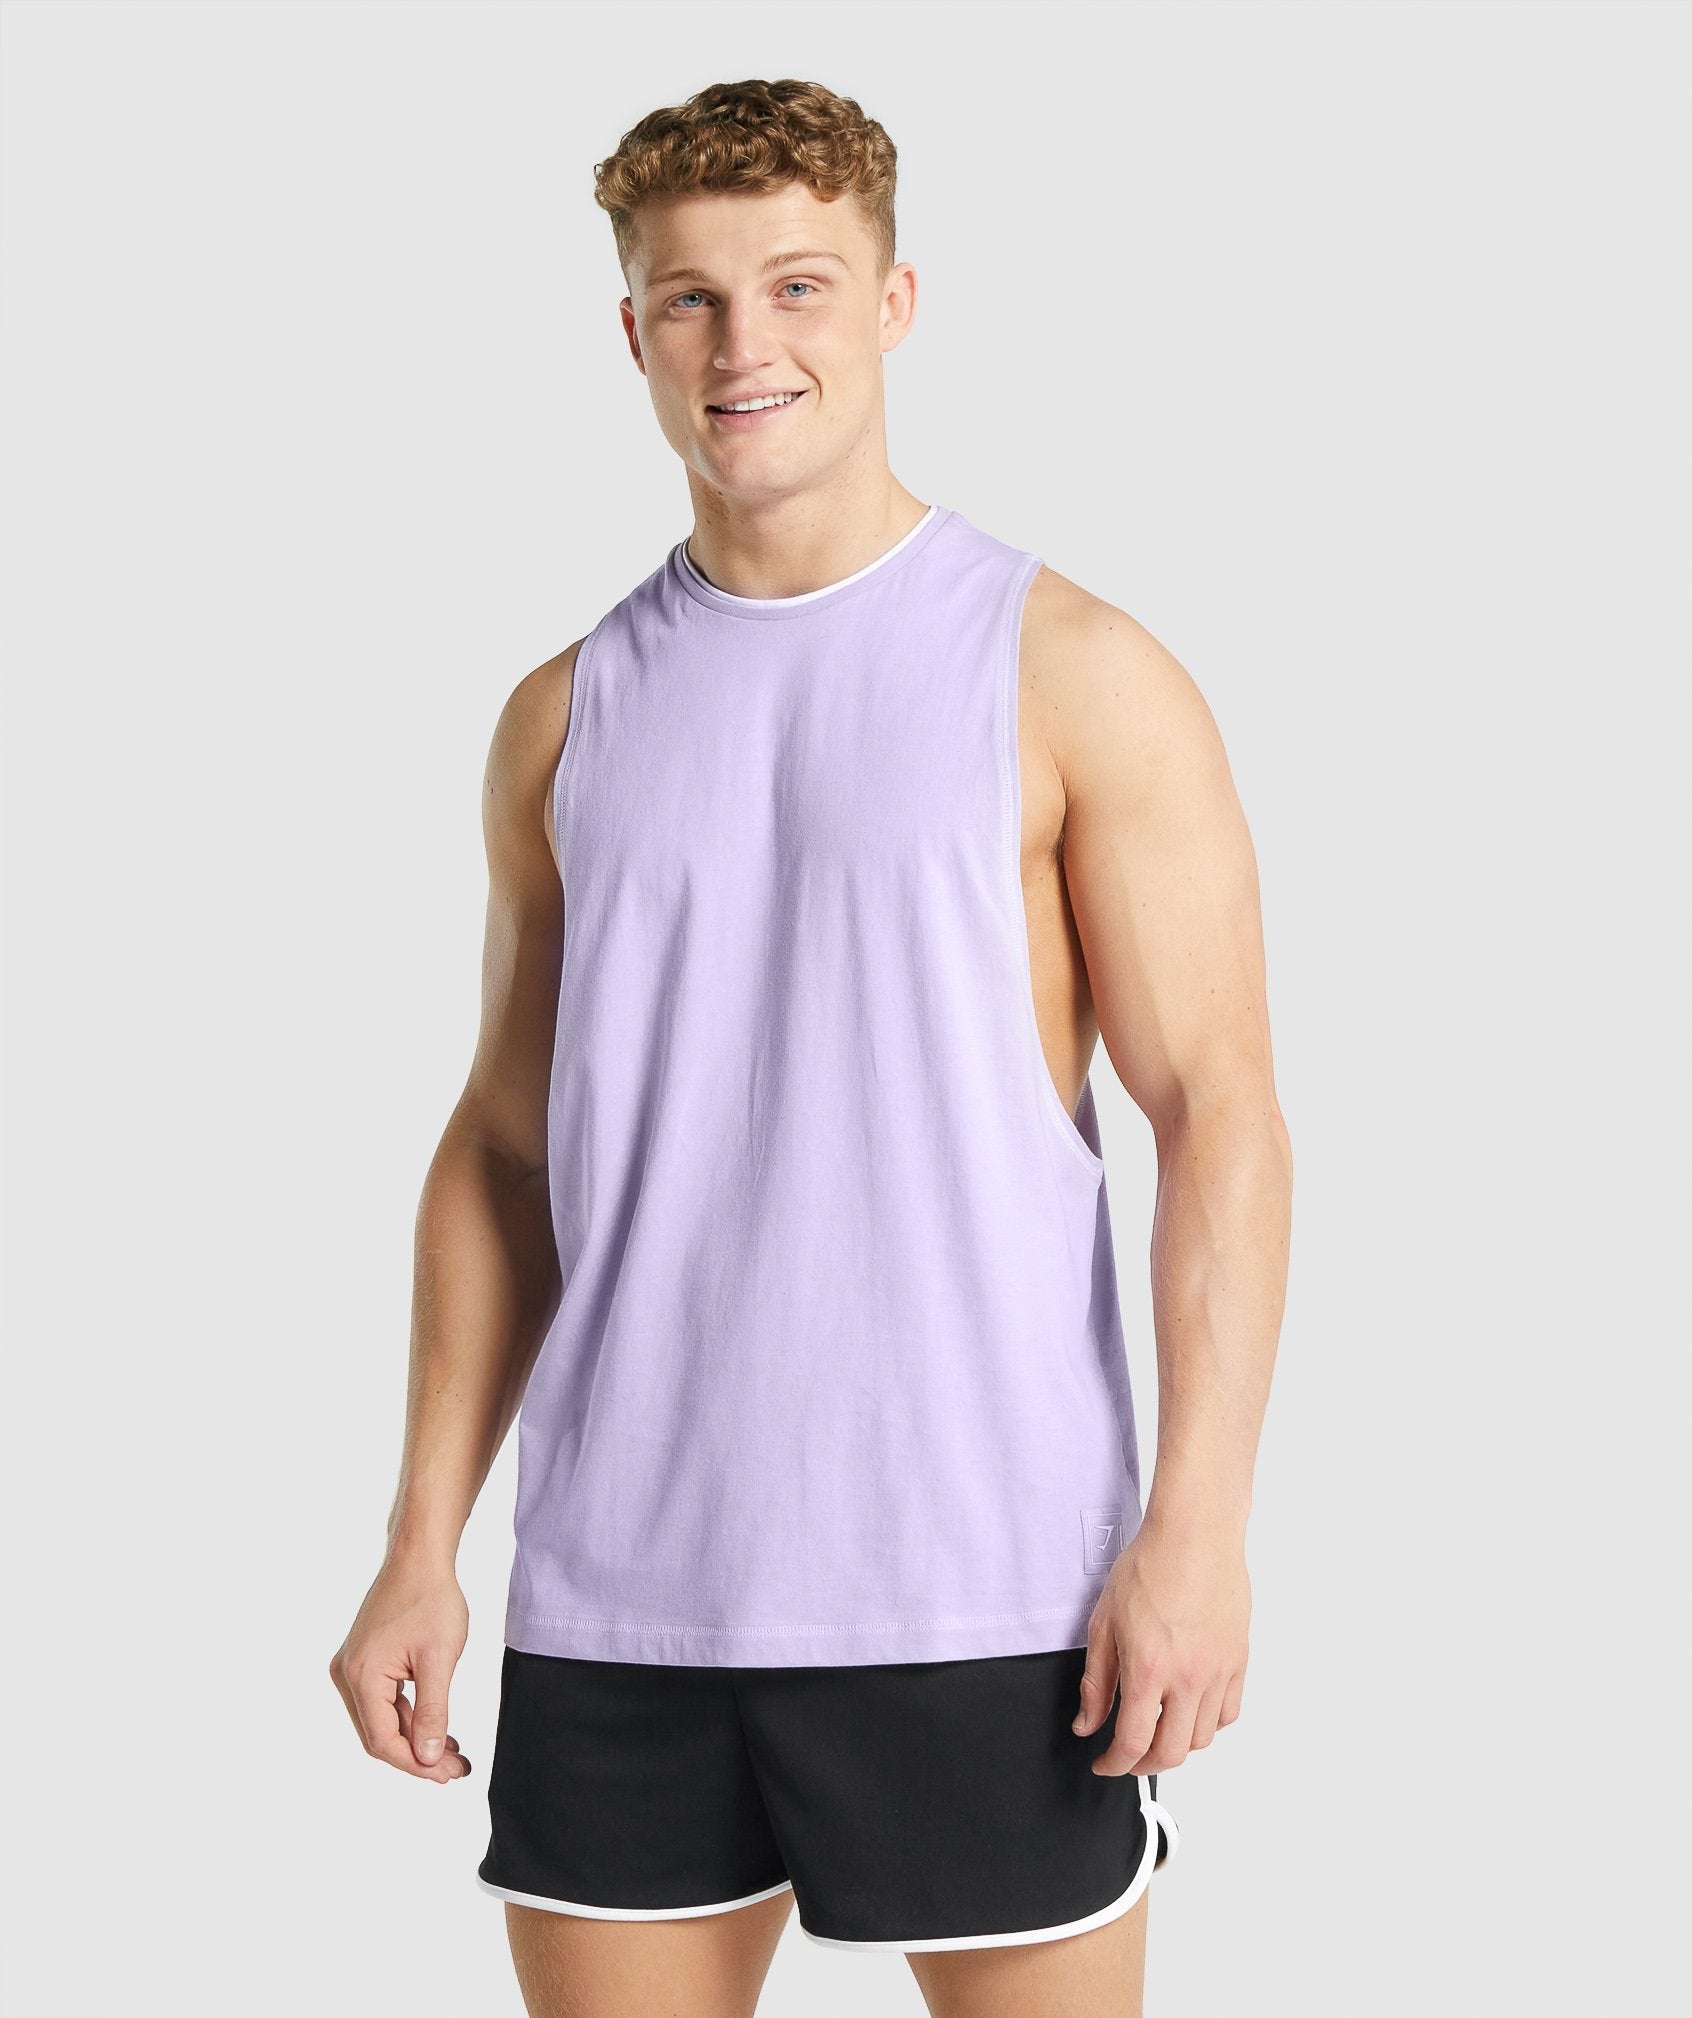 Gymshark Tank Top Purple Size L - $20 - From mary